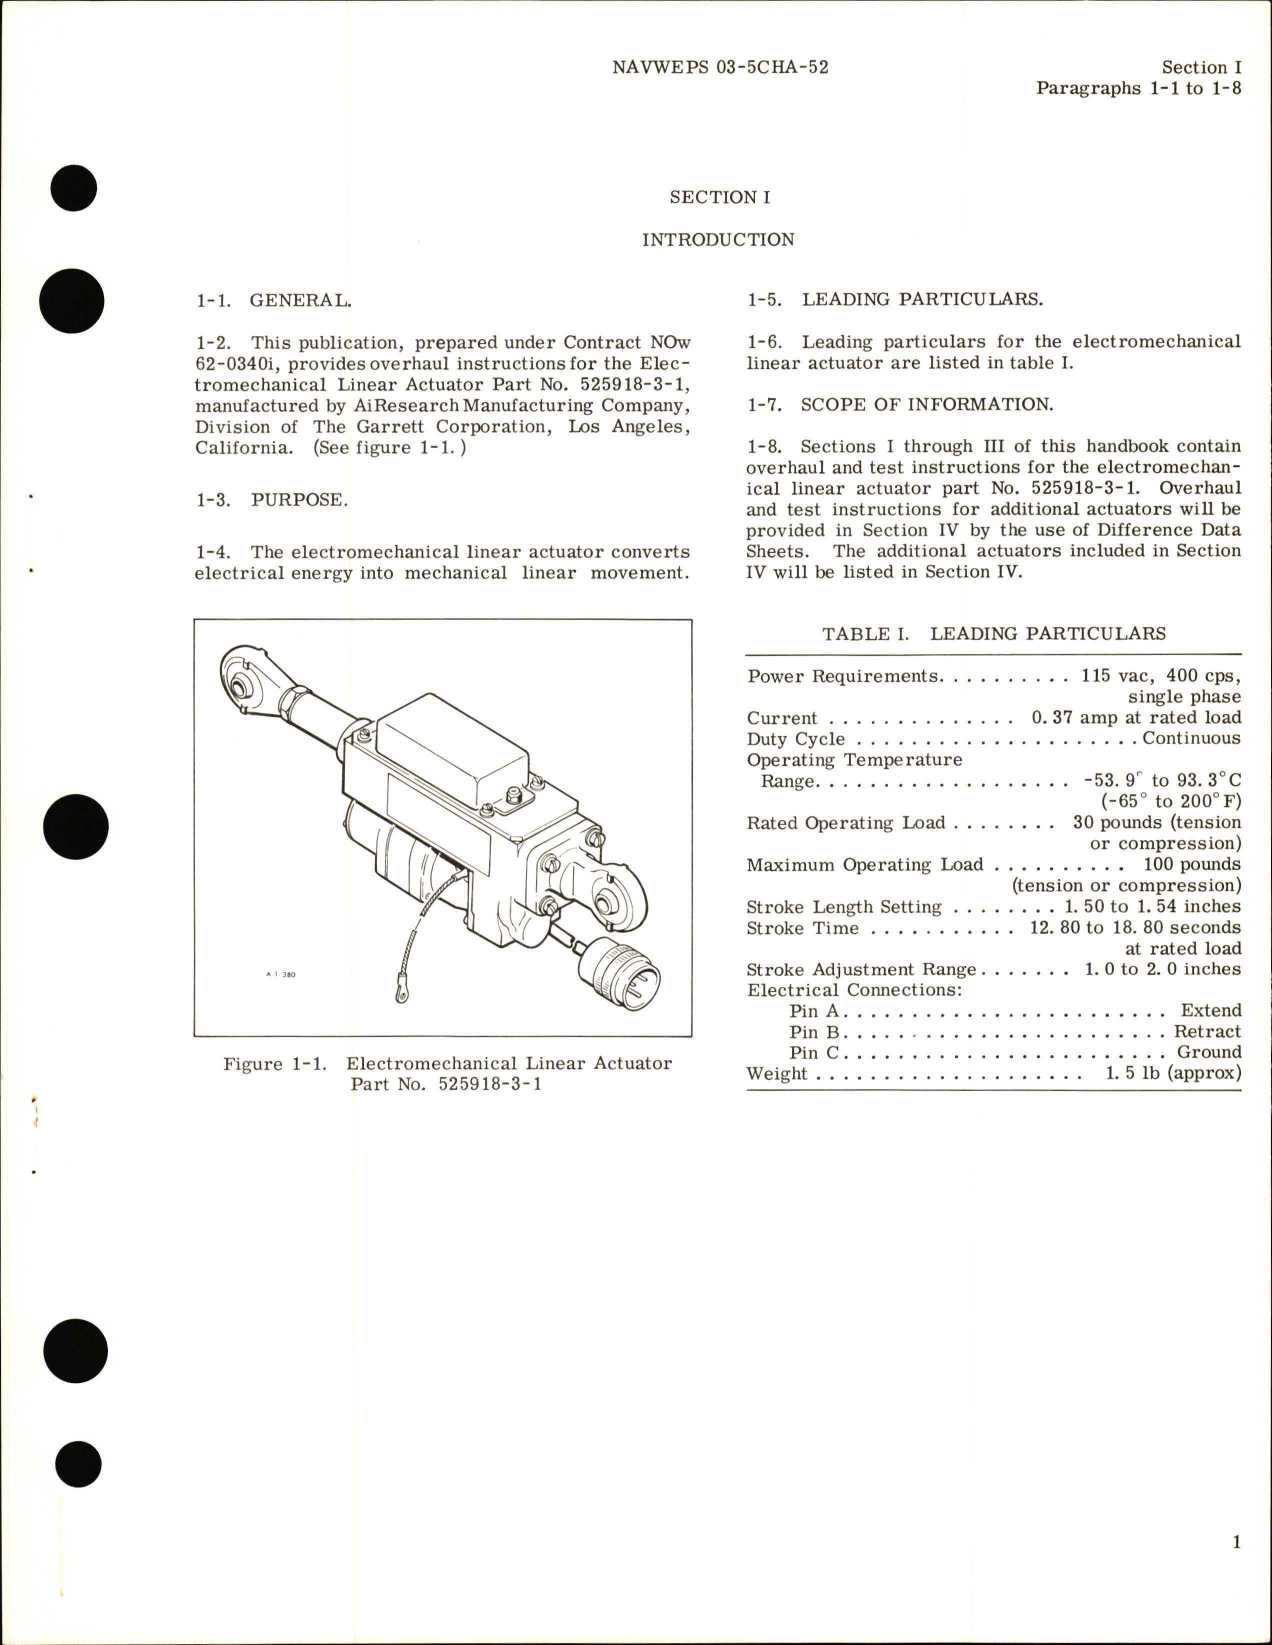 Sample page 5 from AirCorps Library document:  Overhaul Instructions for Electromechanical Linear Actuator - Part 525918-3-1 